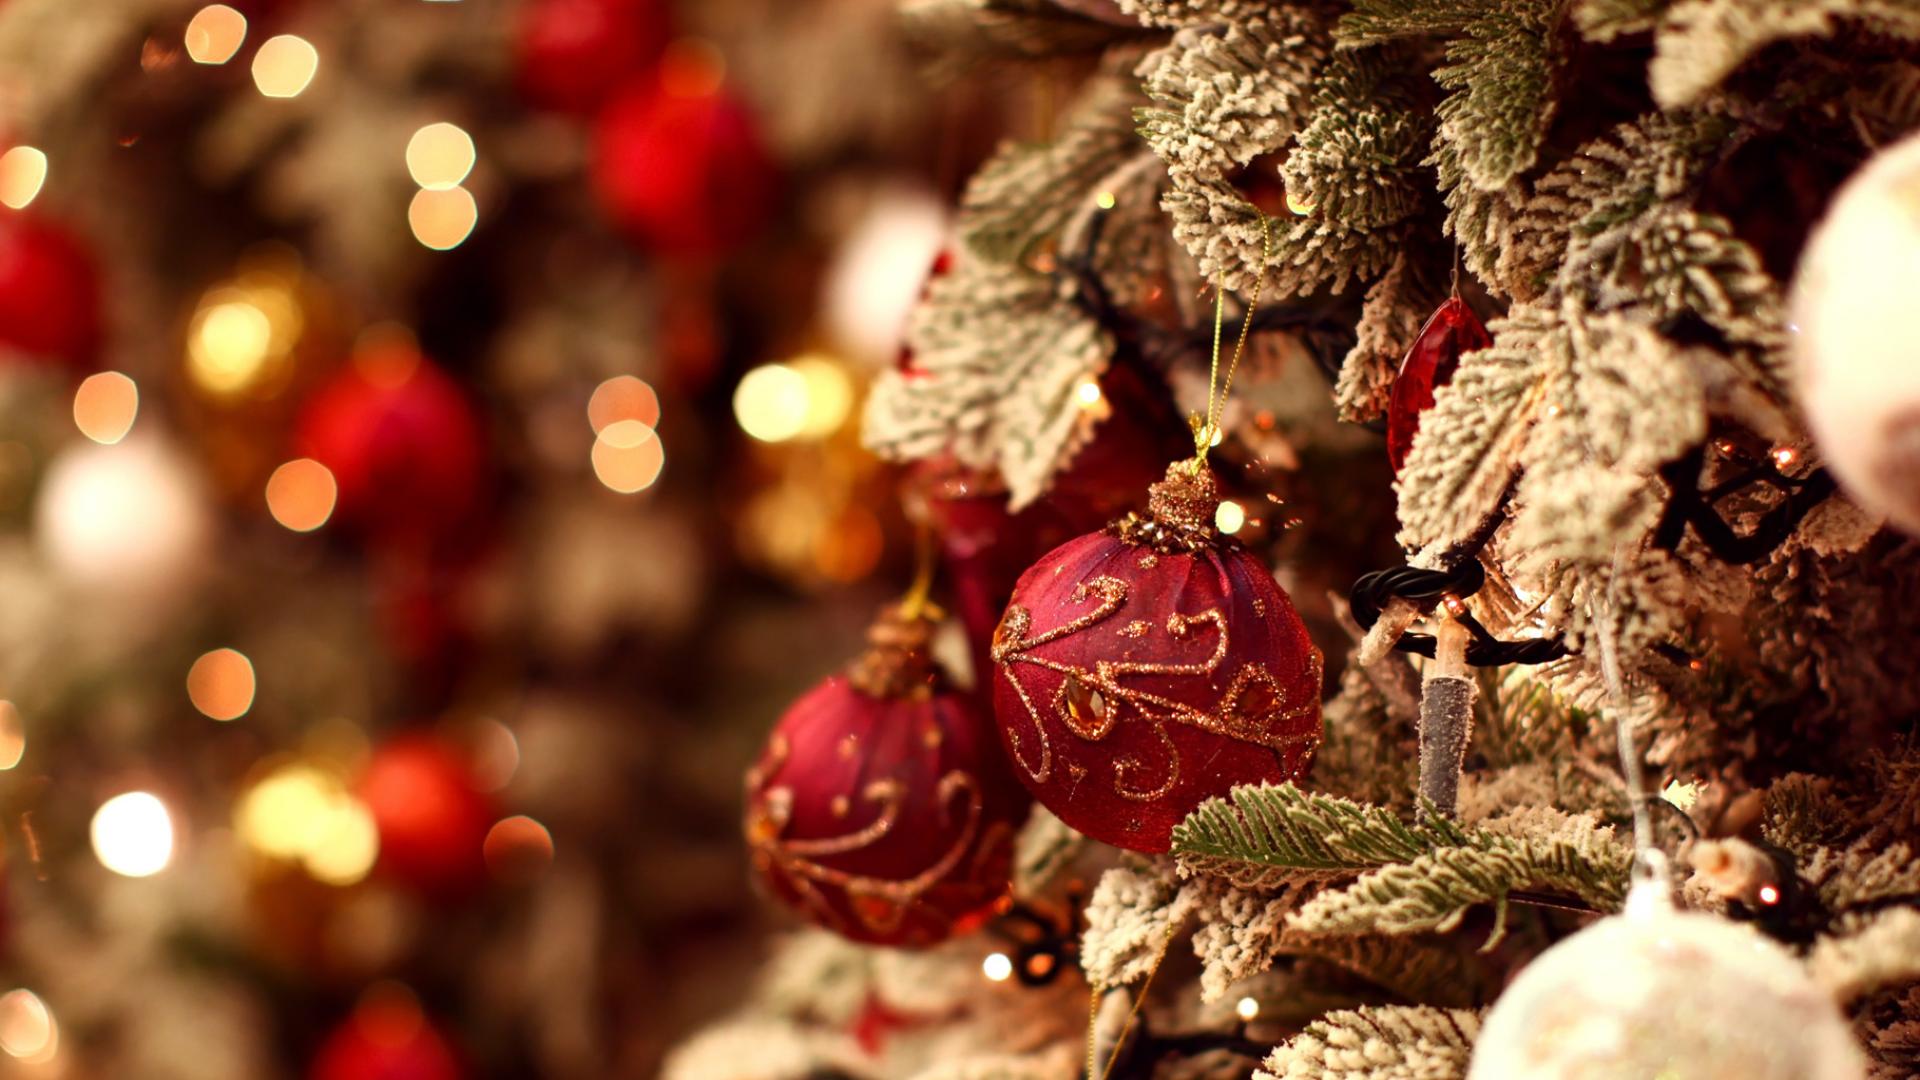 20 Beautiful Christmas Wallpapers and Backgrounds in Full ...